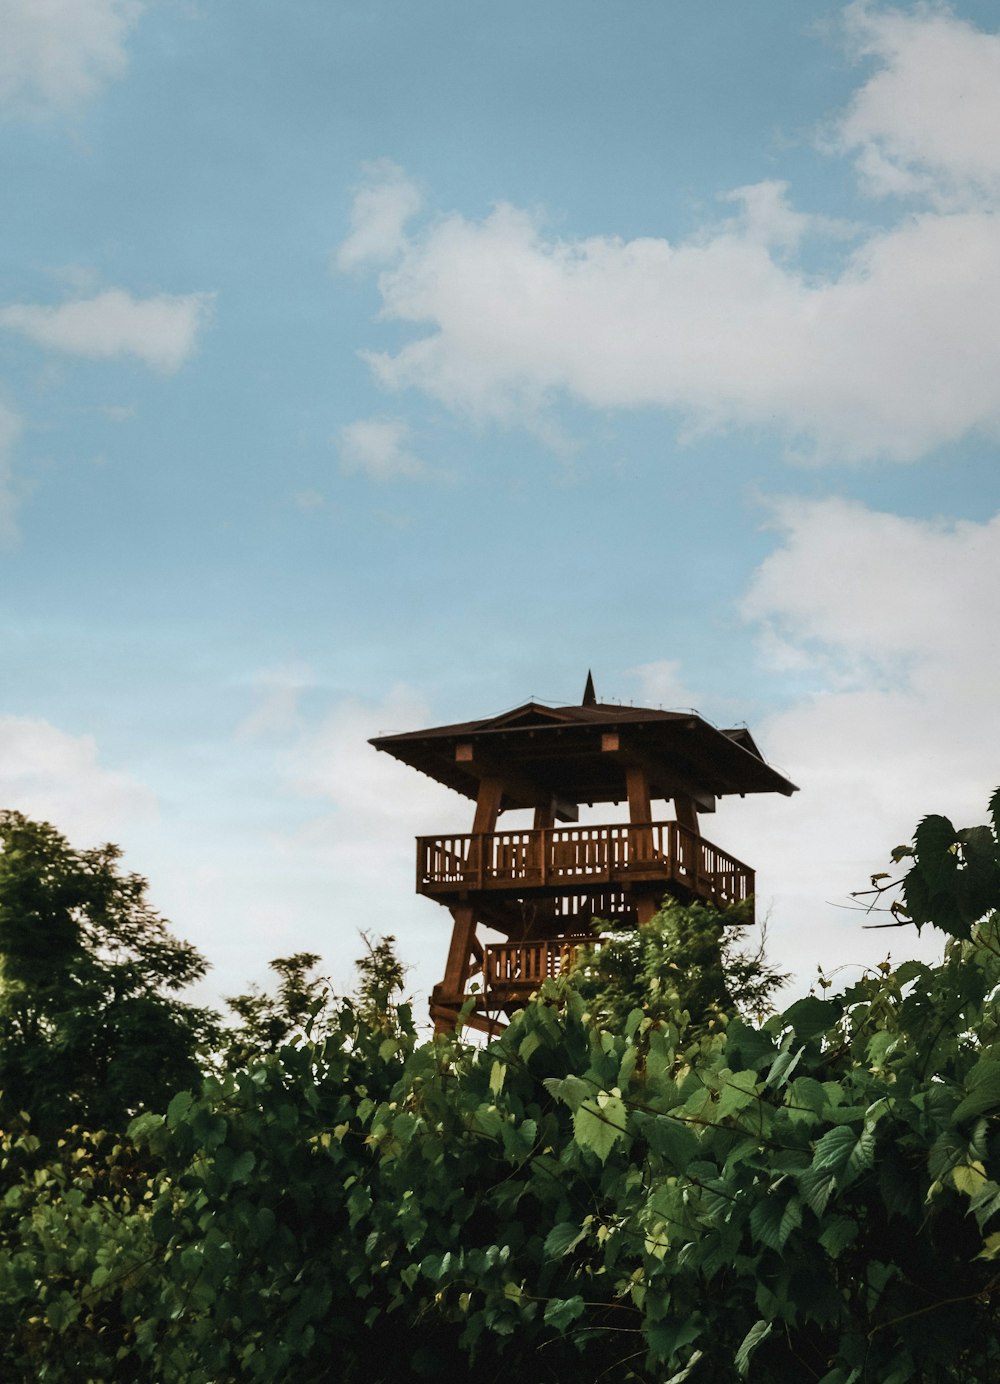 a tall wooden tower sitting above a lush green forest